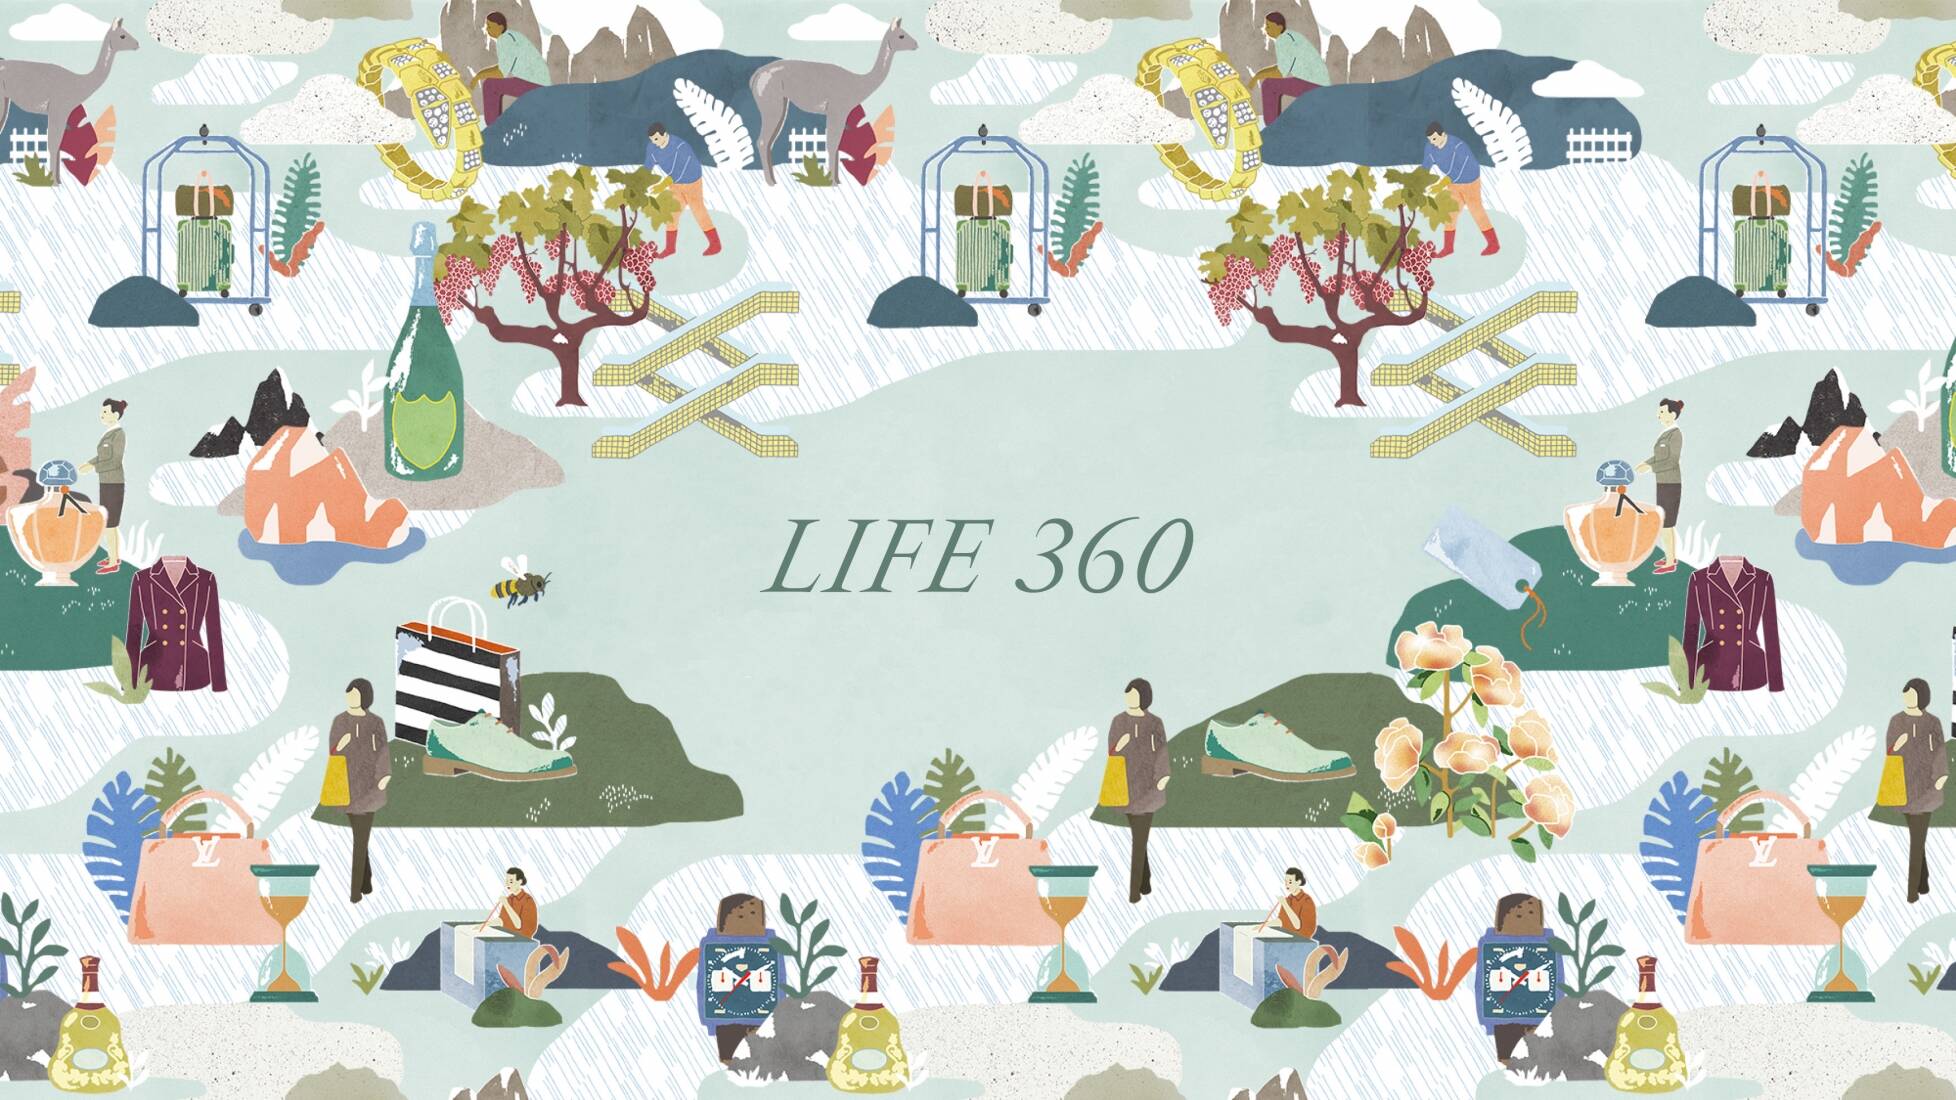 The alliance of nature and creativity for a new vision of luxury: LVMH  announces new objectives of LIFE 360 environmental strategy - LVMH